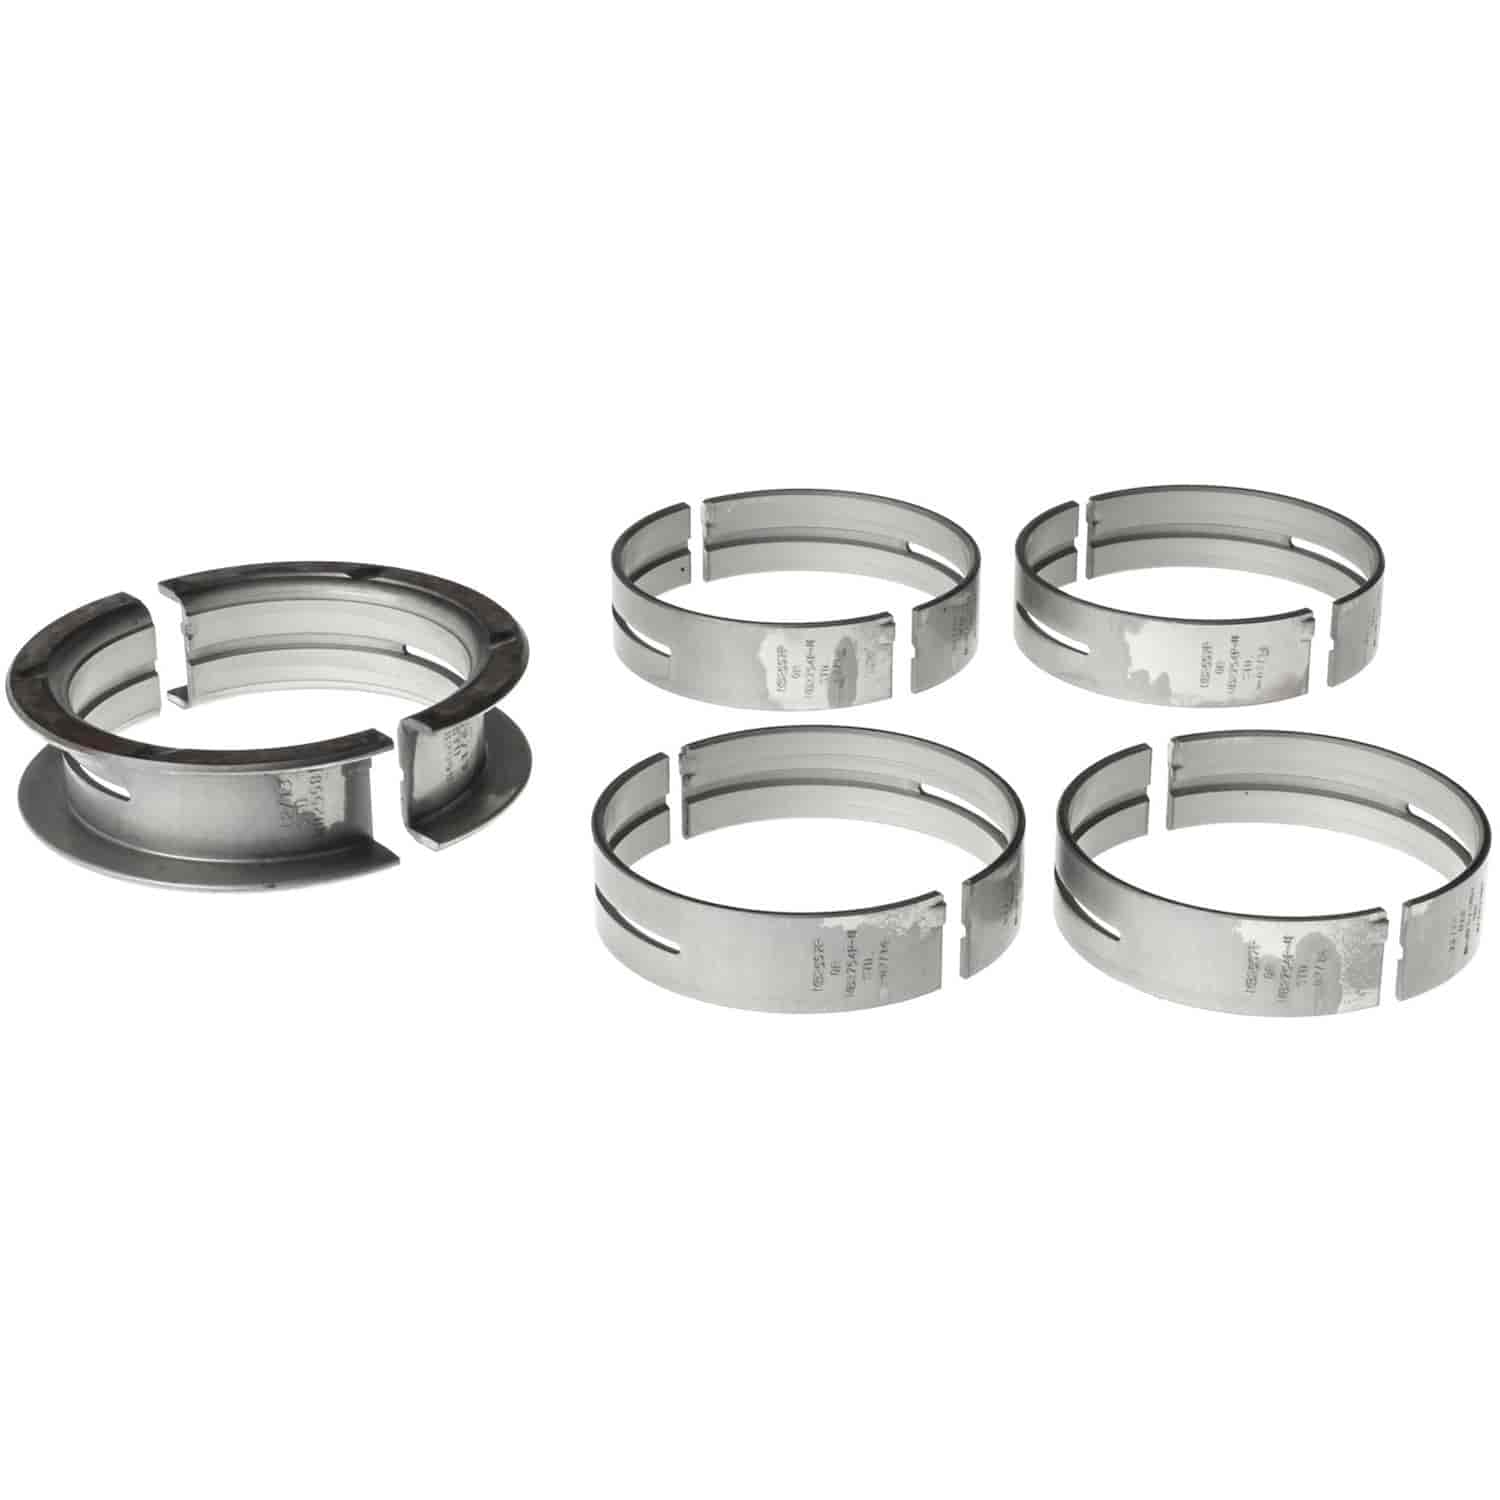 Main Bearing Set Ford 1969-1997 V8 351W/351M/400 (5.8/6.6L) with Standard Size